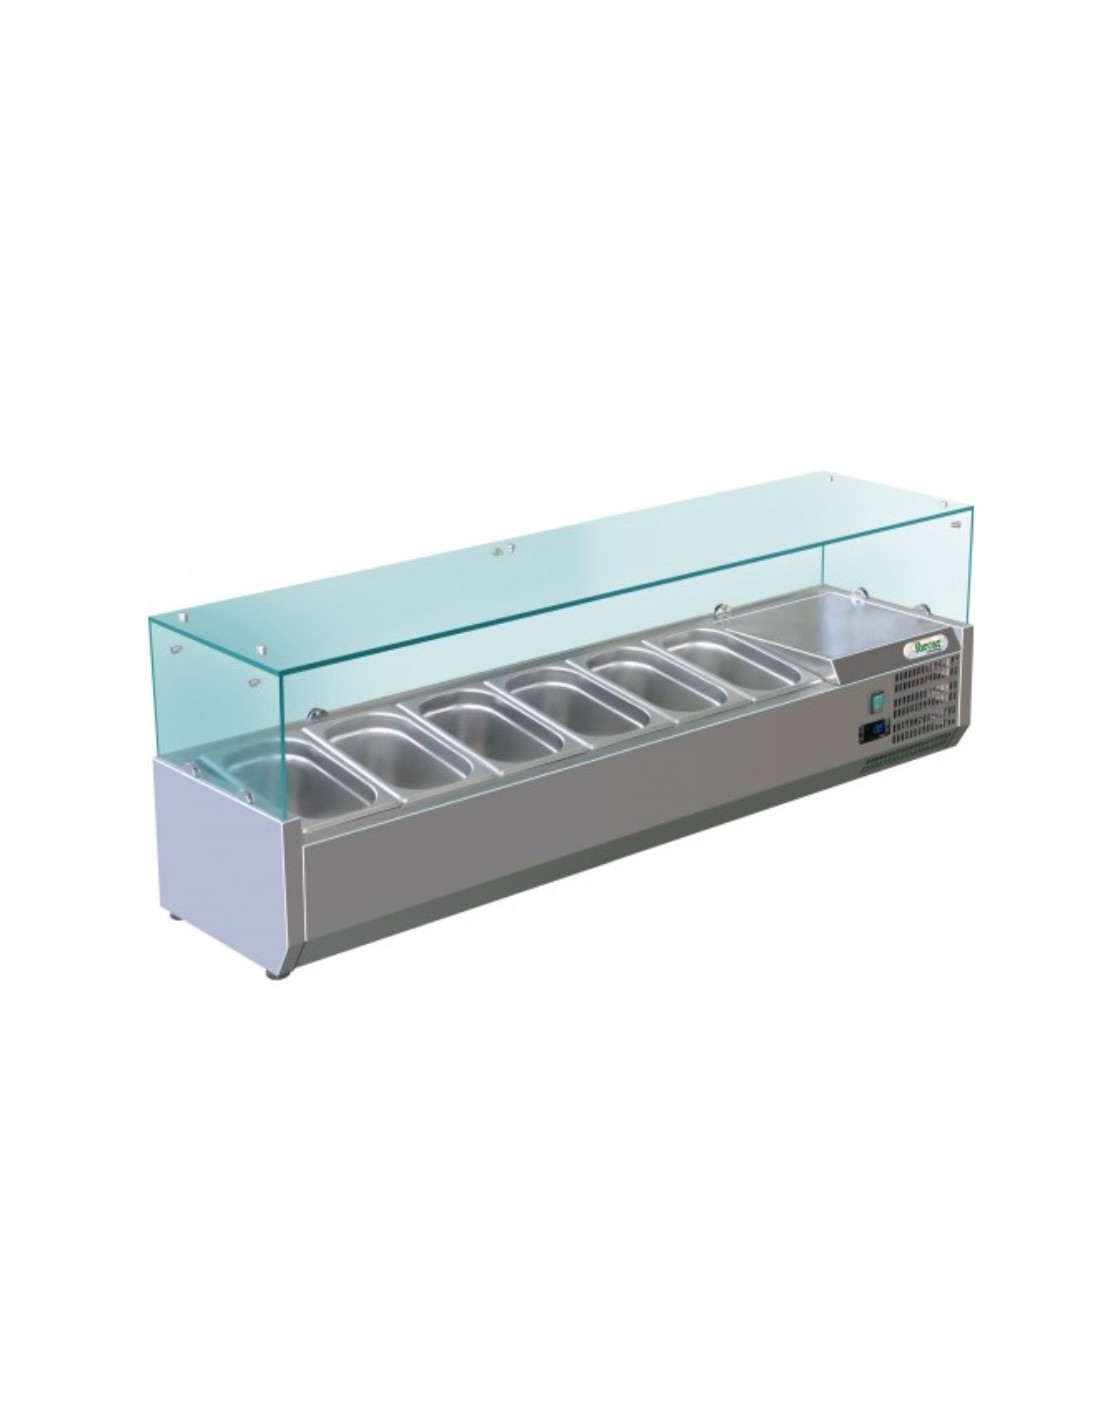 Refrigerated display case brings ingredients - Static - Capacity 6 GN 1/4 - cm 140 x 33 x 44.5h